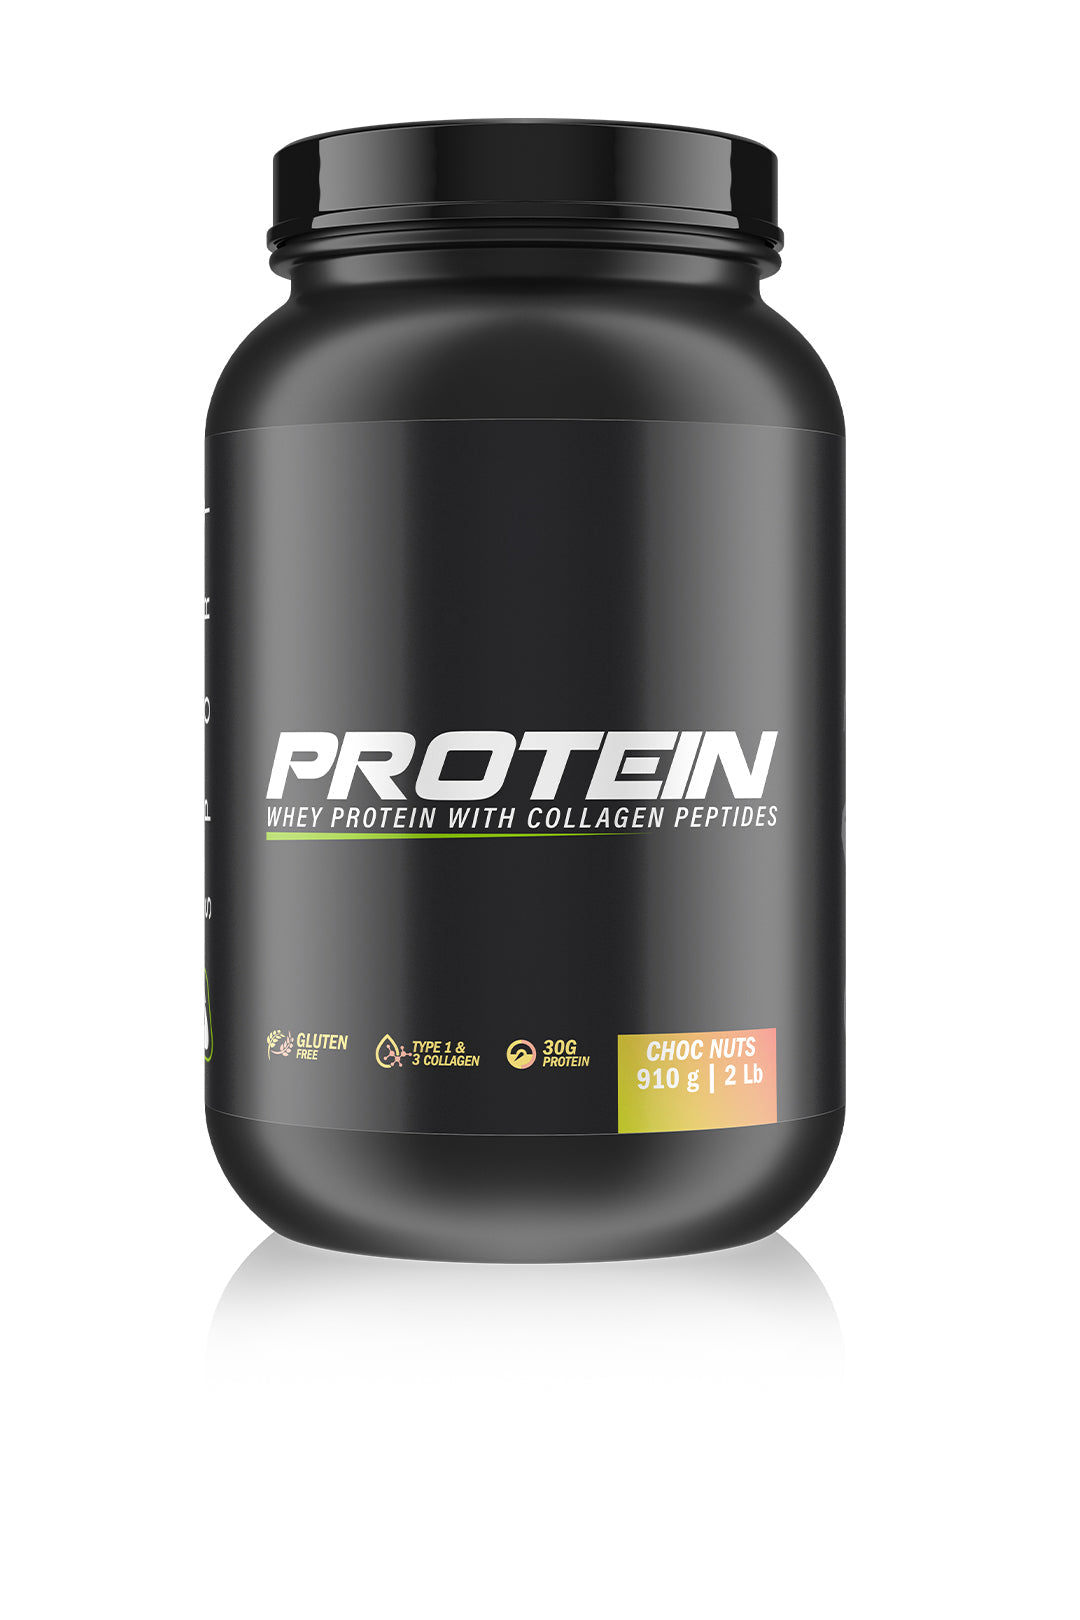 Choc Nuts Whey Protein with Collagen Peptides - Free Gift